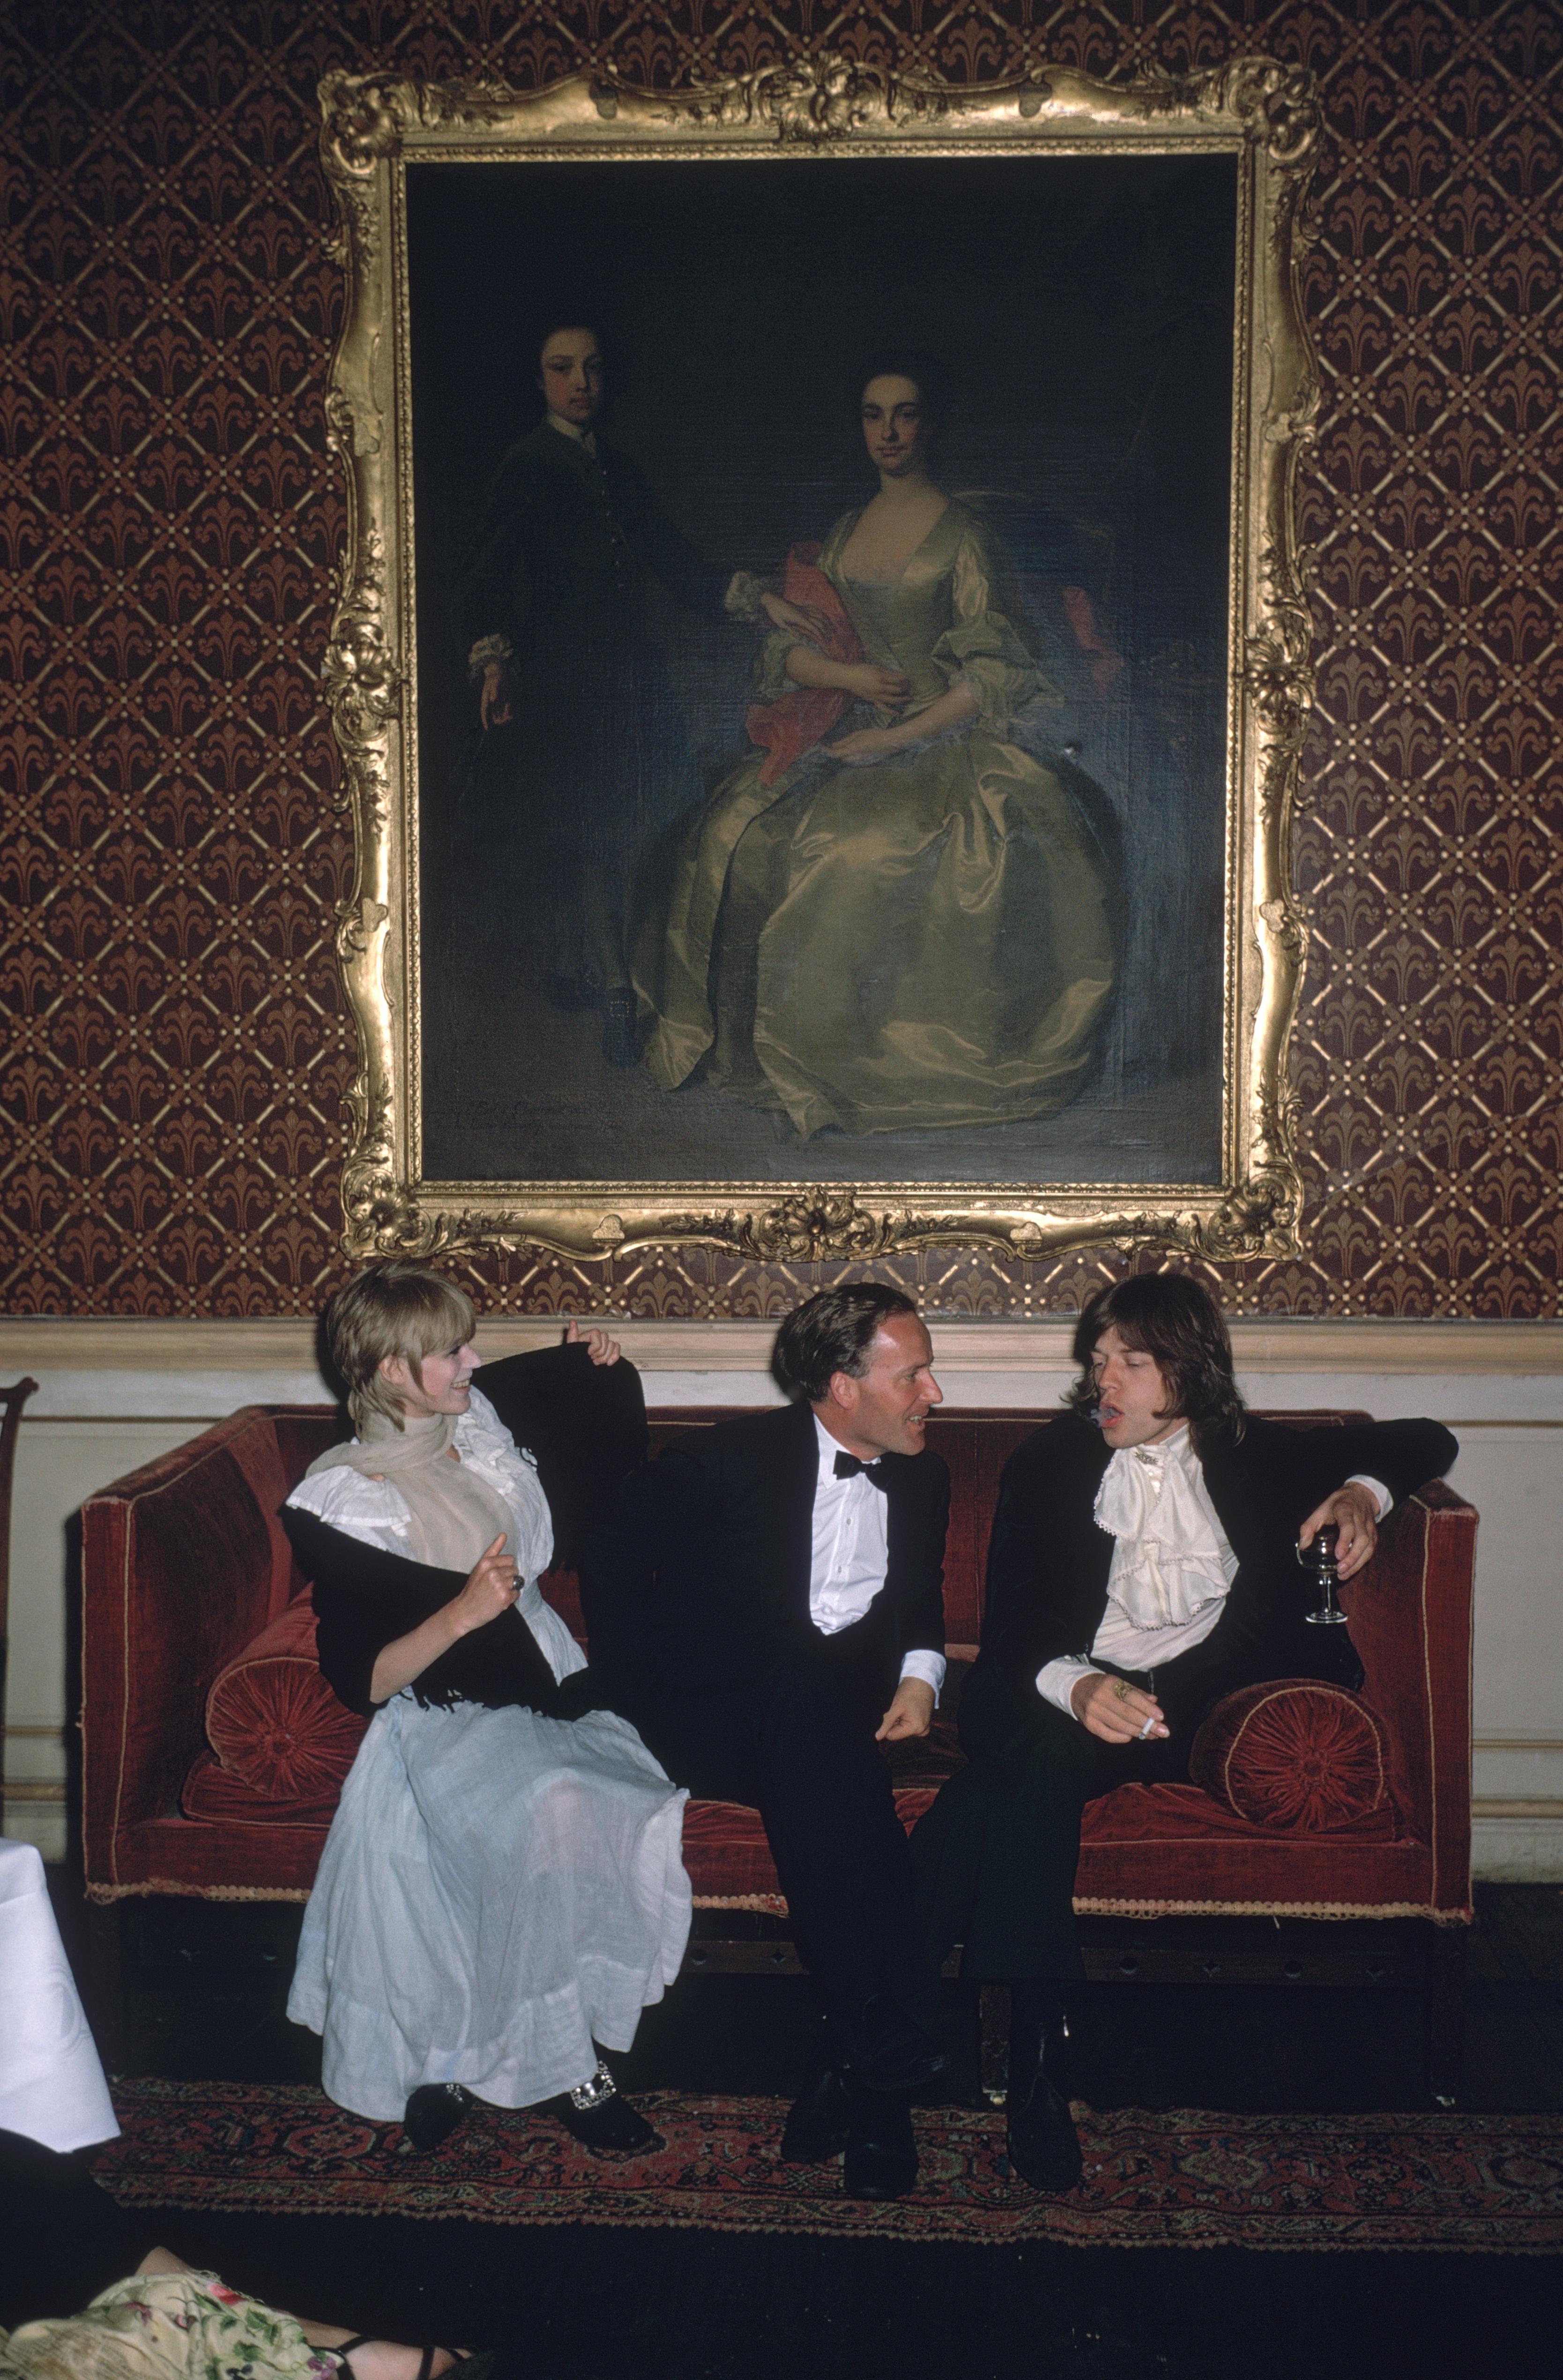 Slim Aarons Portrait Photograph - Pop and Society 1968: Marianne Faithful, Desmond Guinness, and Mick Jagger